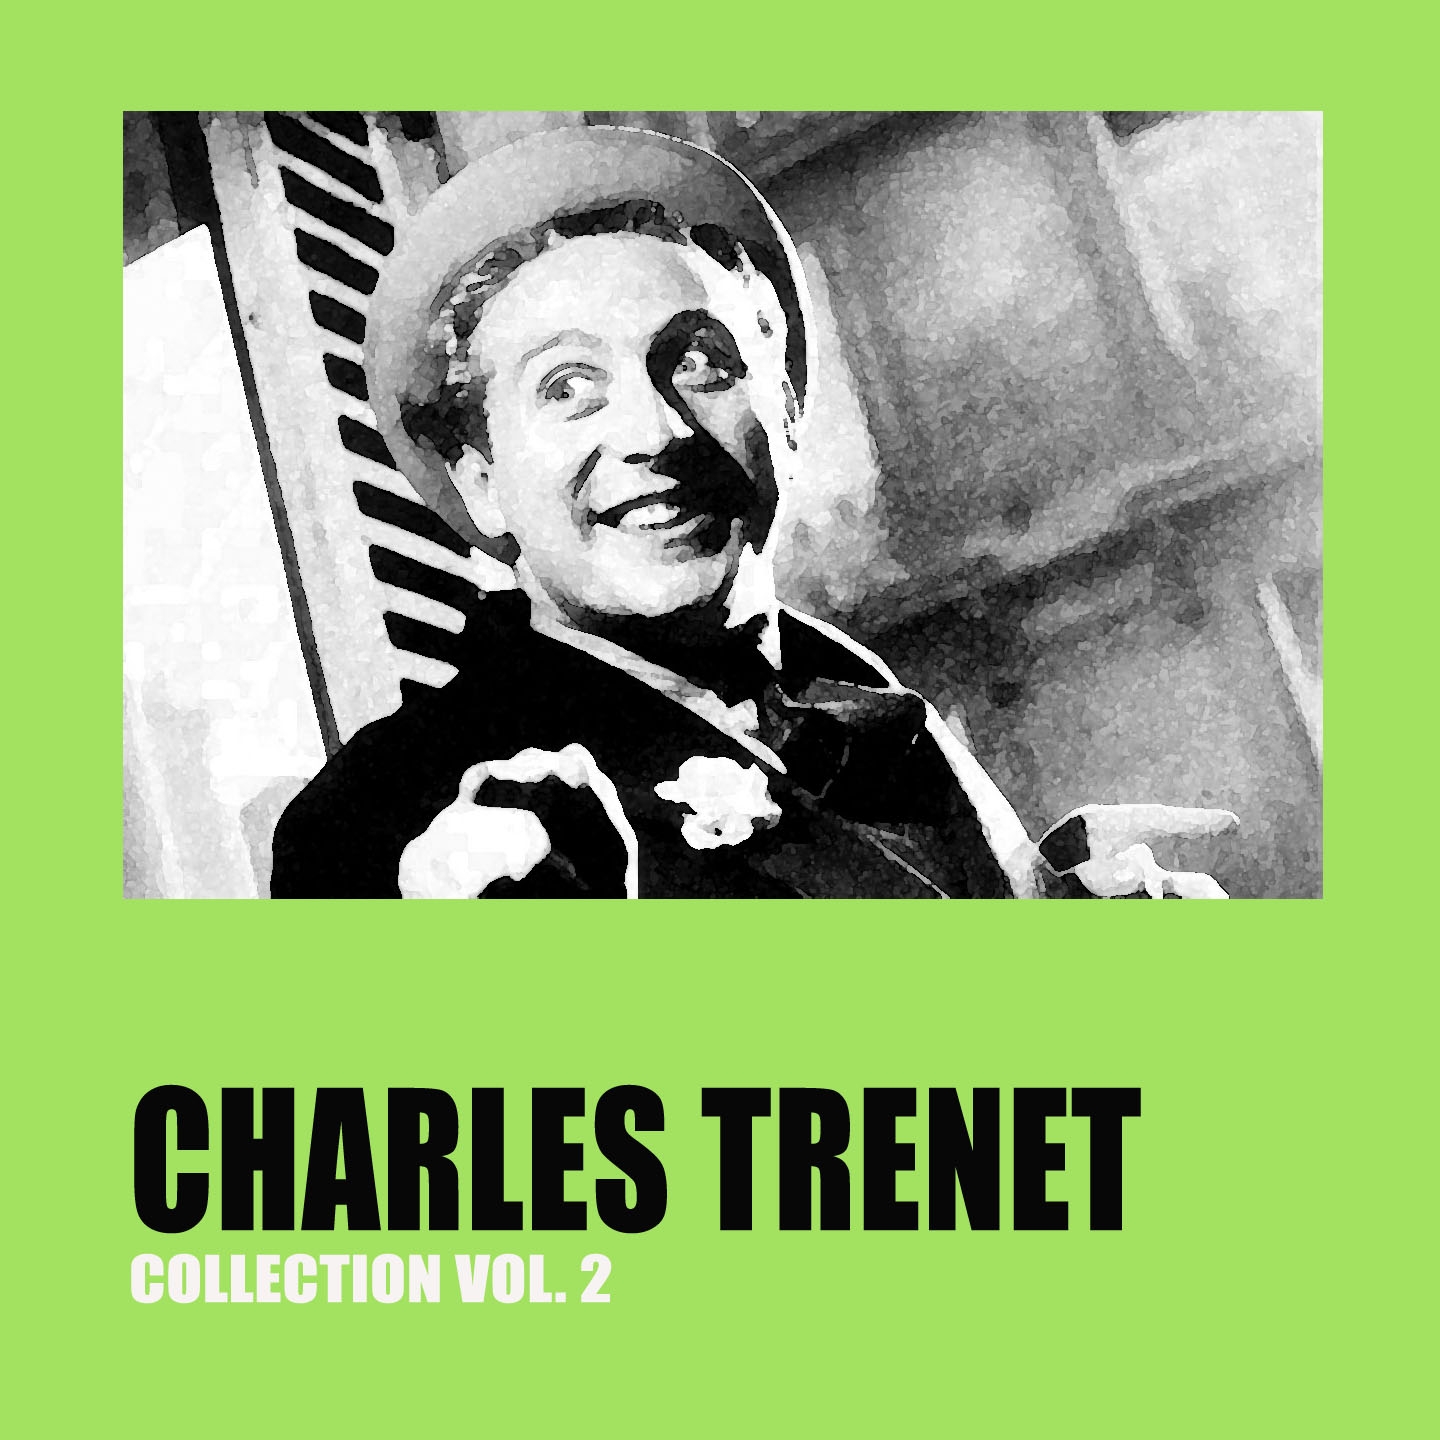 Charles Trenet Collection Vol. 2